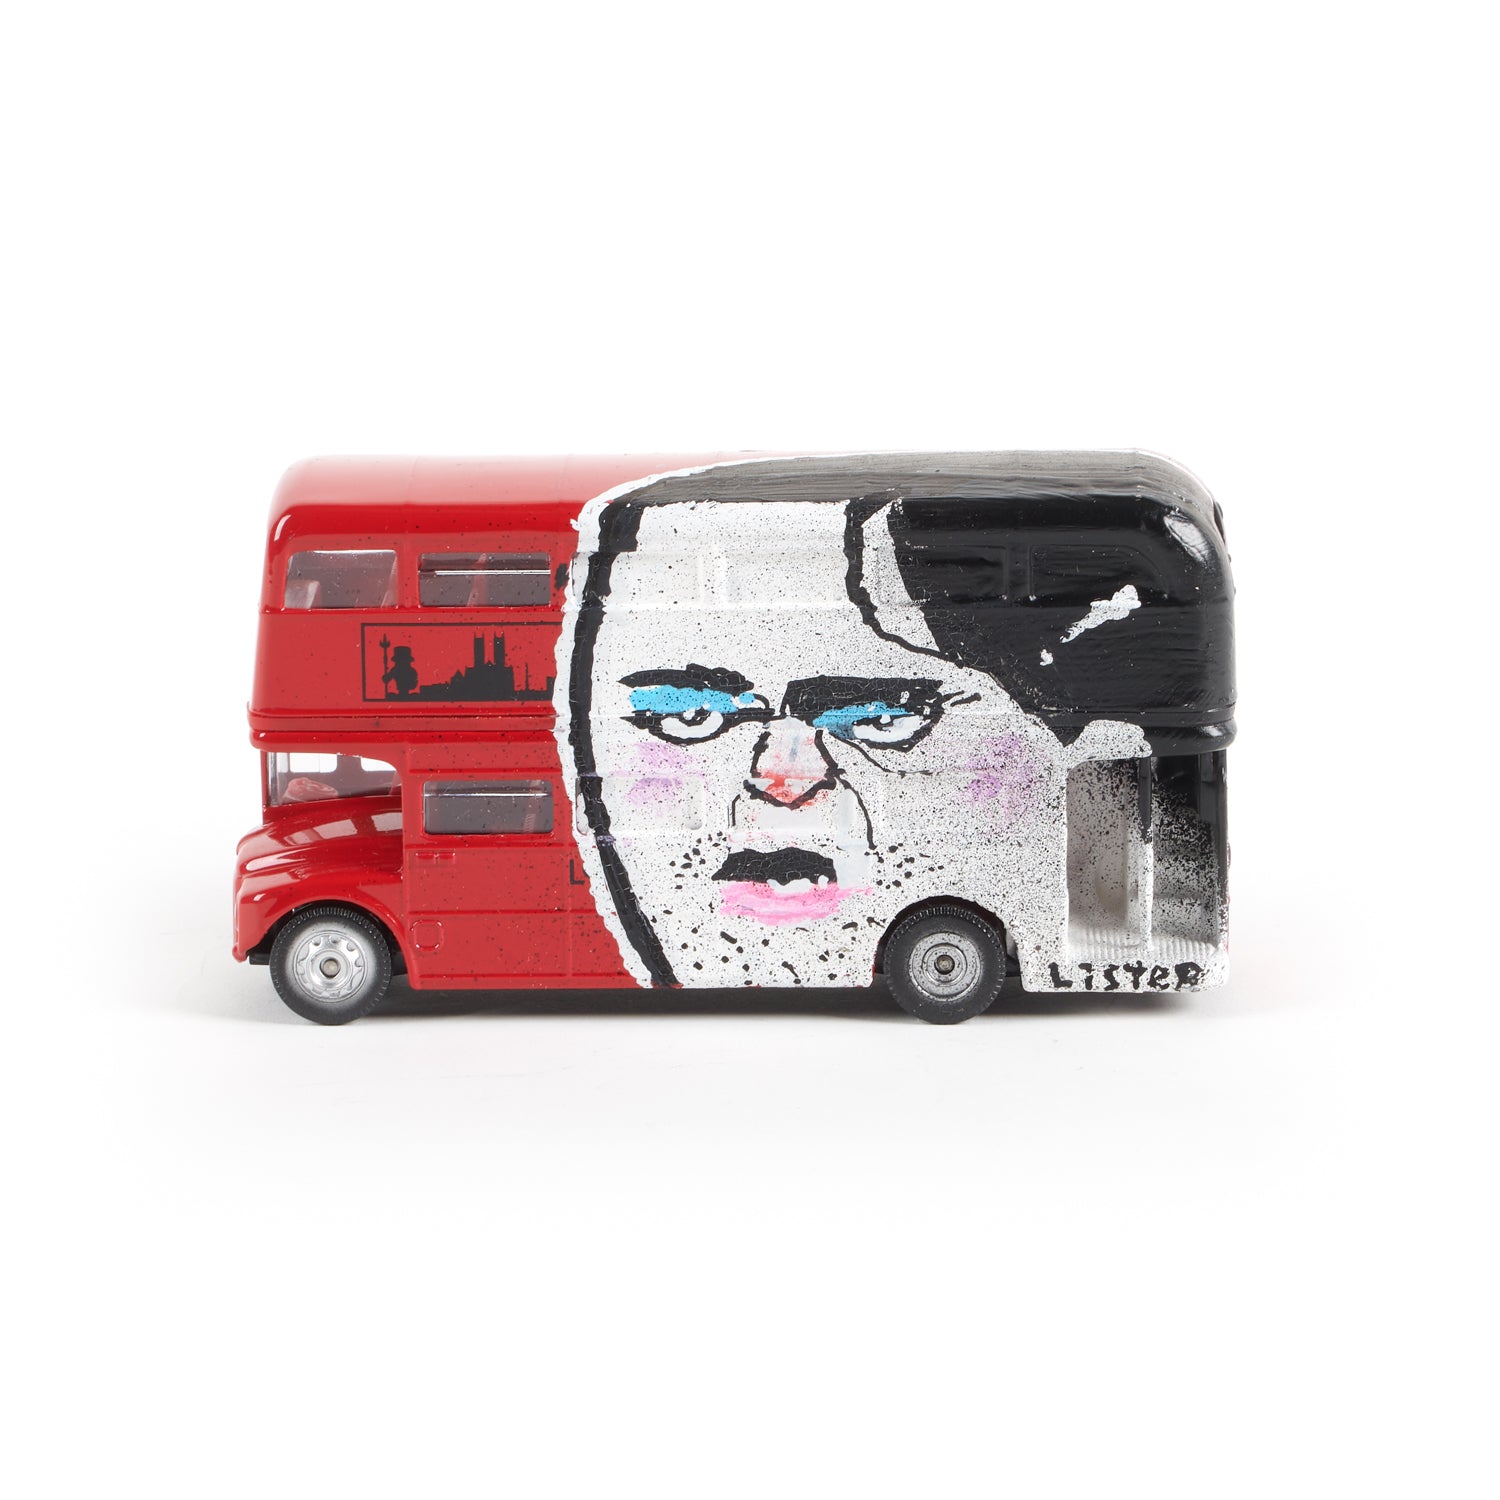 Anthony Lister Bus